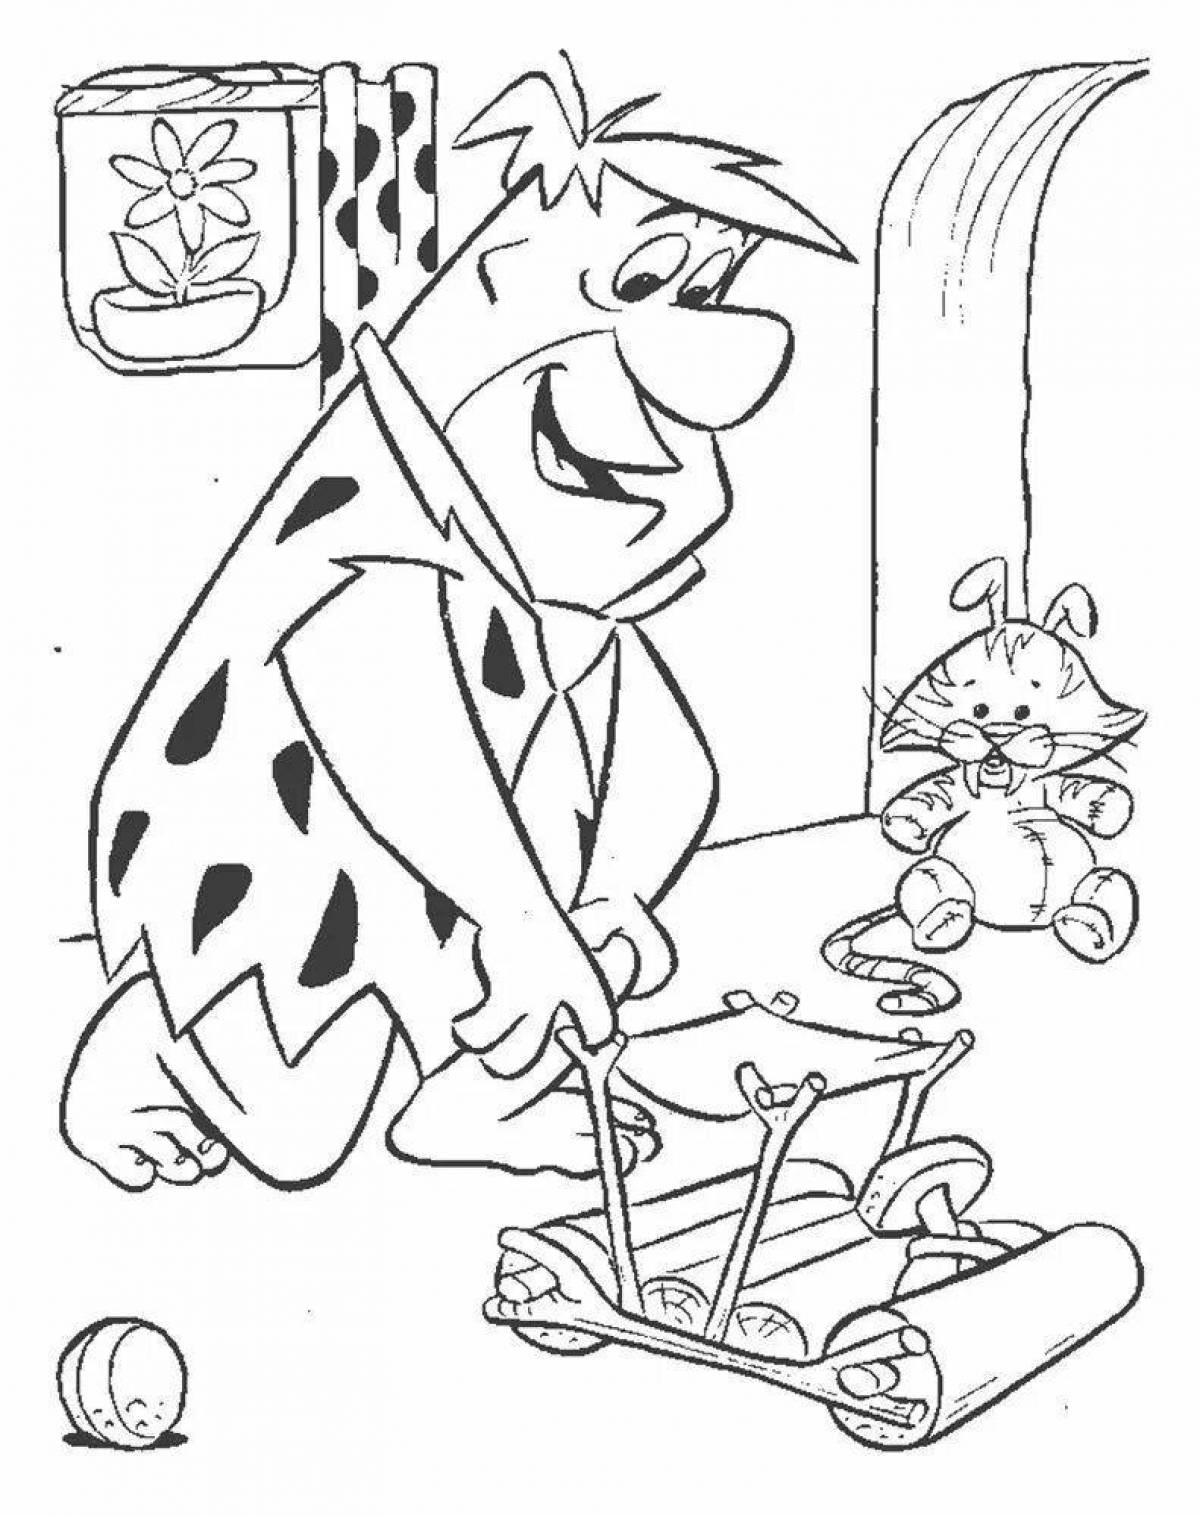 Fred flintstone's amazing coloring page